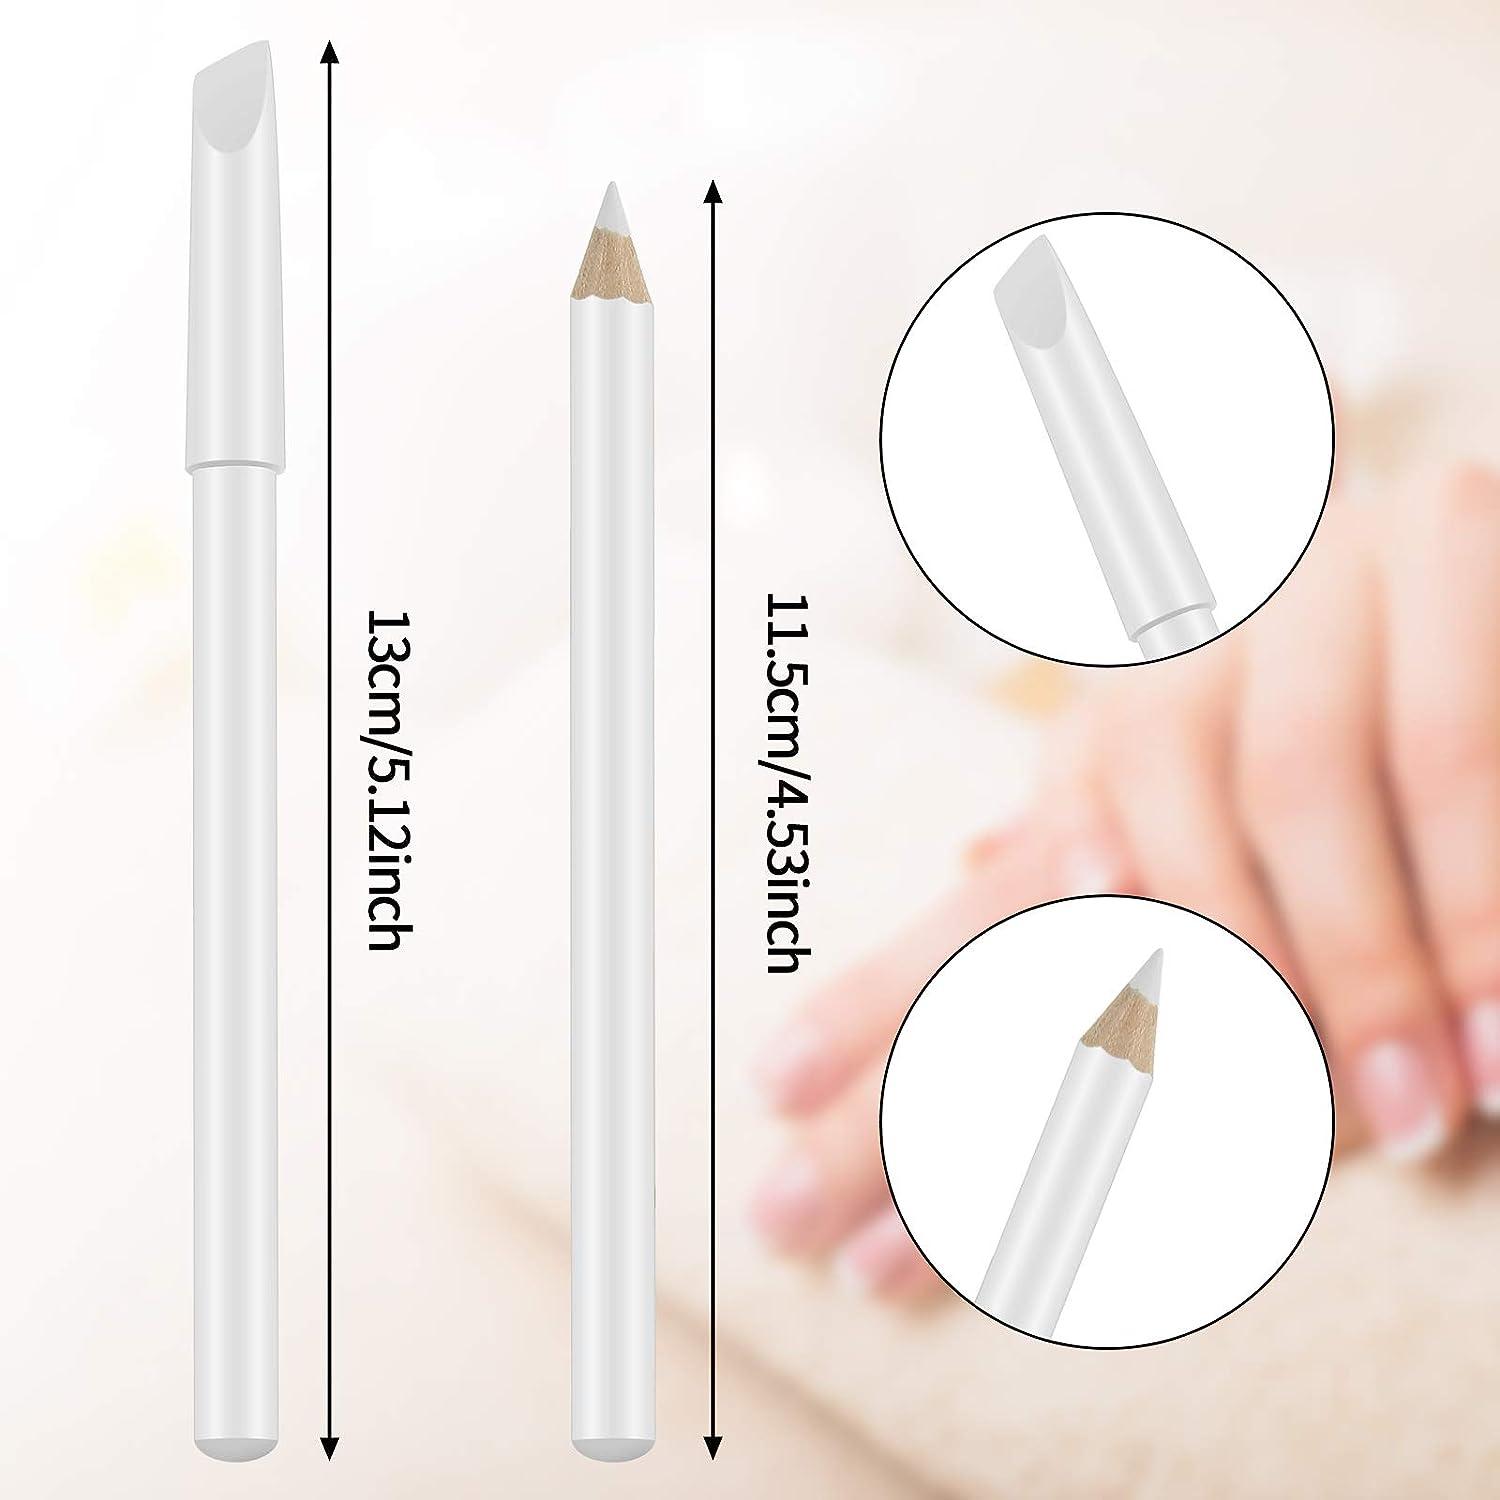 8 Pieces White Nail Pencil 2-in-1 Nail Whitening Pencils French